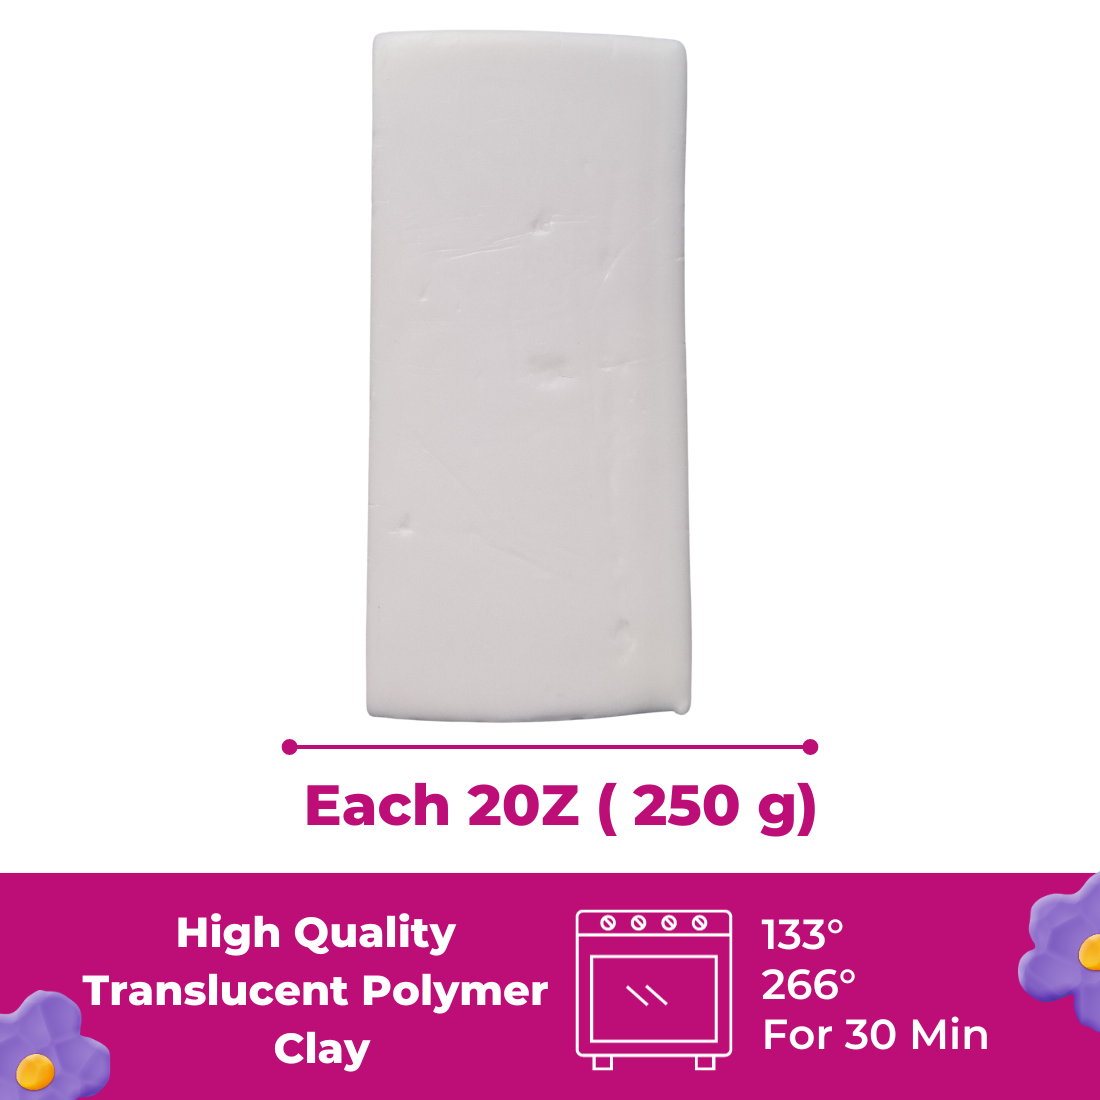 250g Translucent Polymer Oven Bake Clay Elastico Series